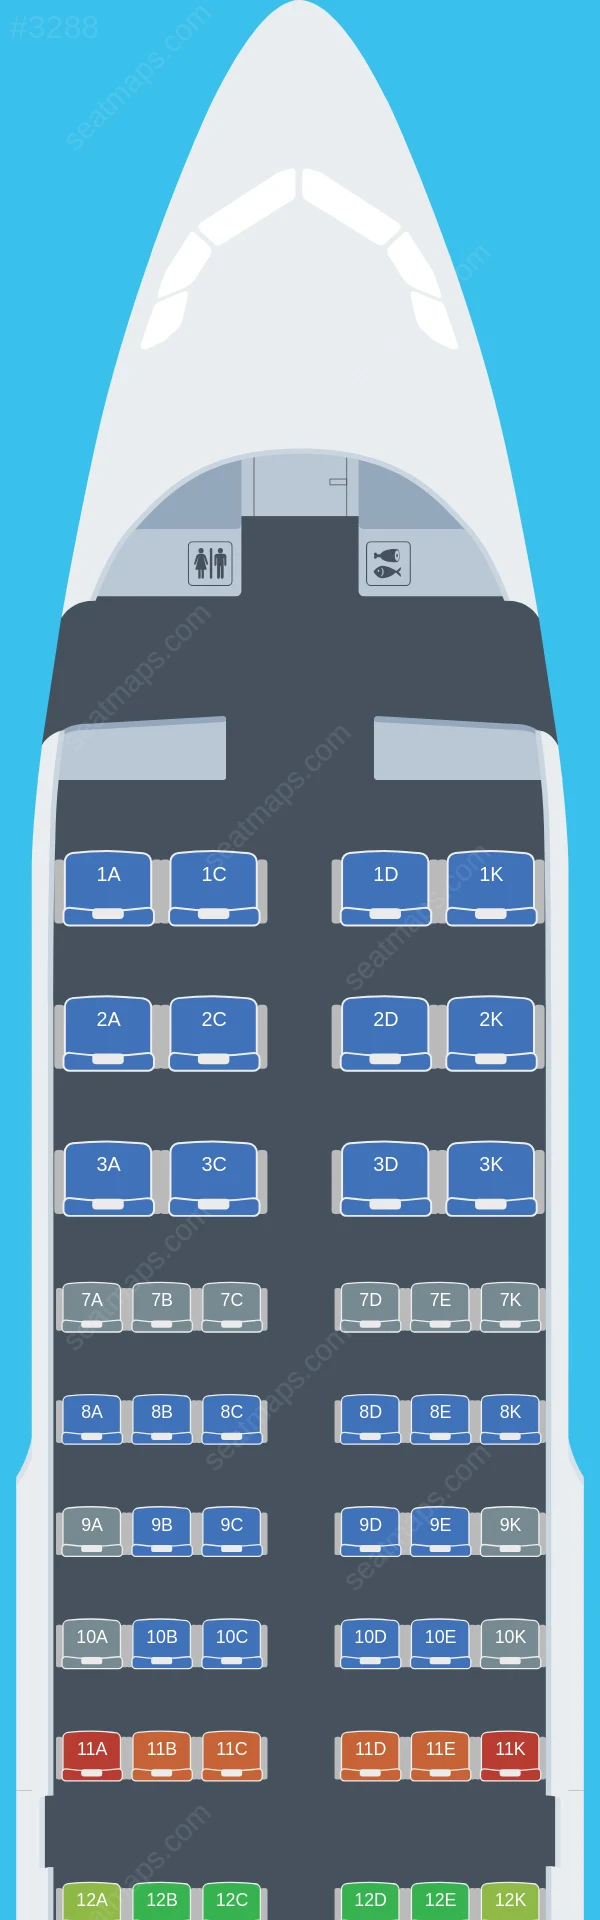 Avianca Airbus A319-100 V.1 seatmap preview